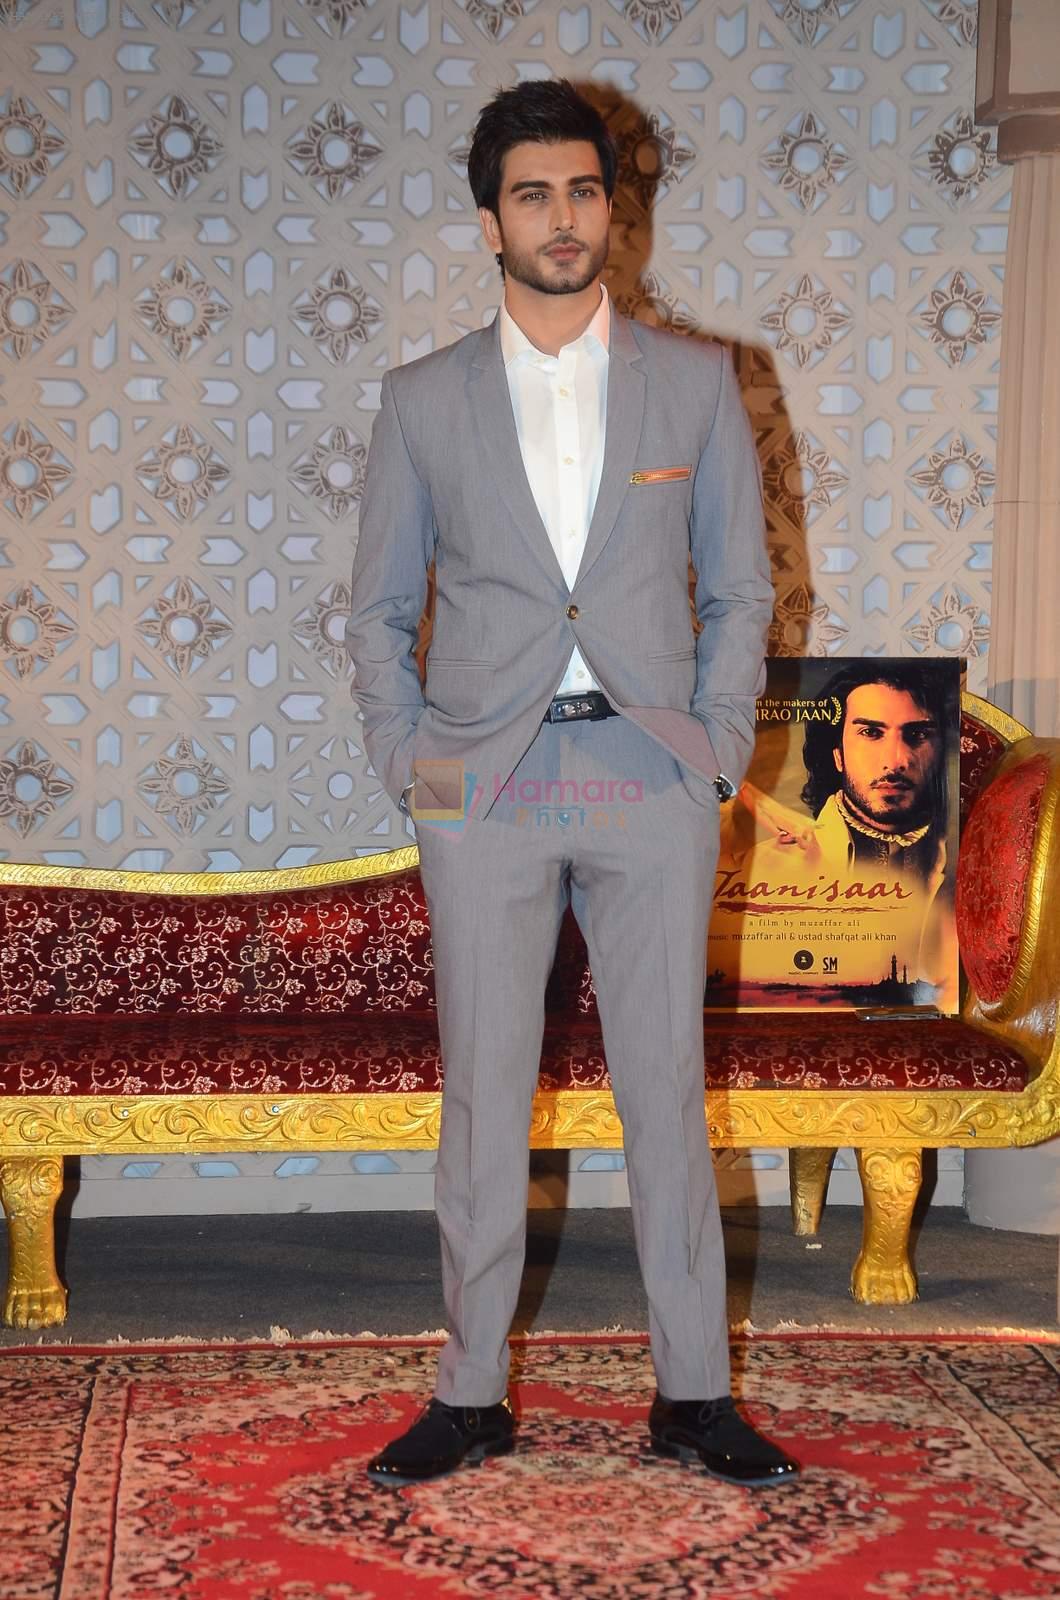 Imran Abbas at Jaanisaar music launch in Lalit Hotel on 23rd July 2015